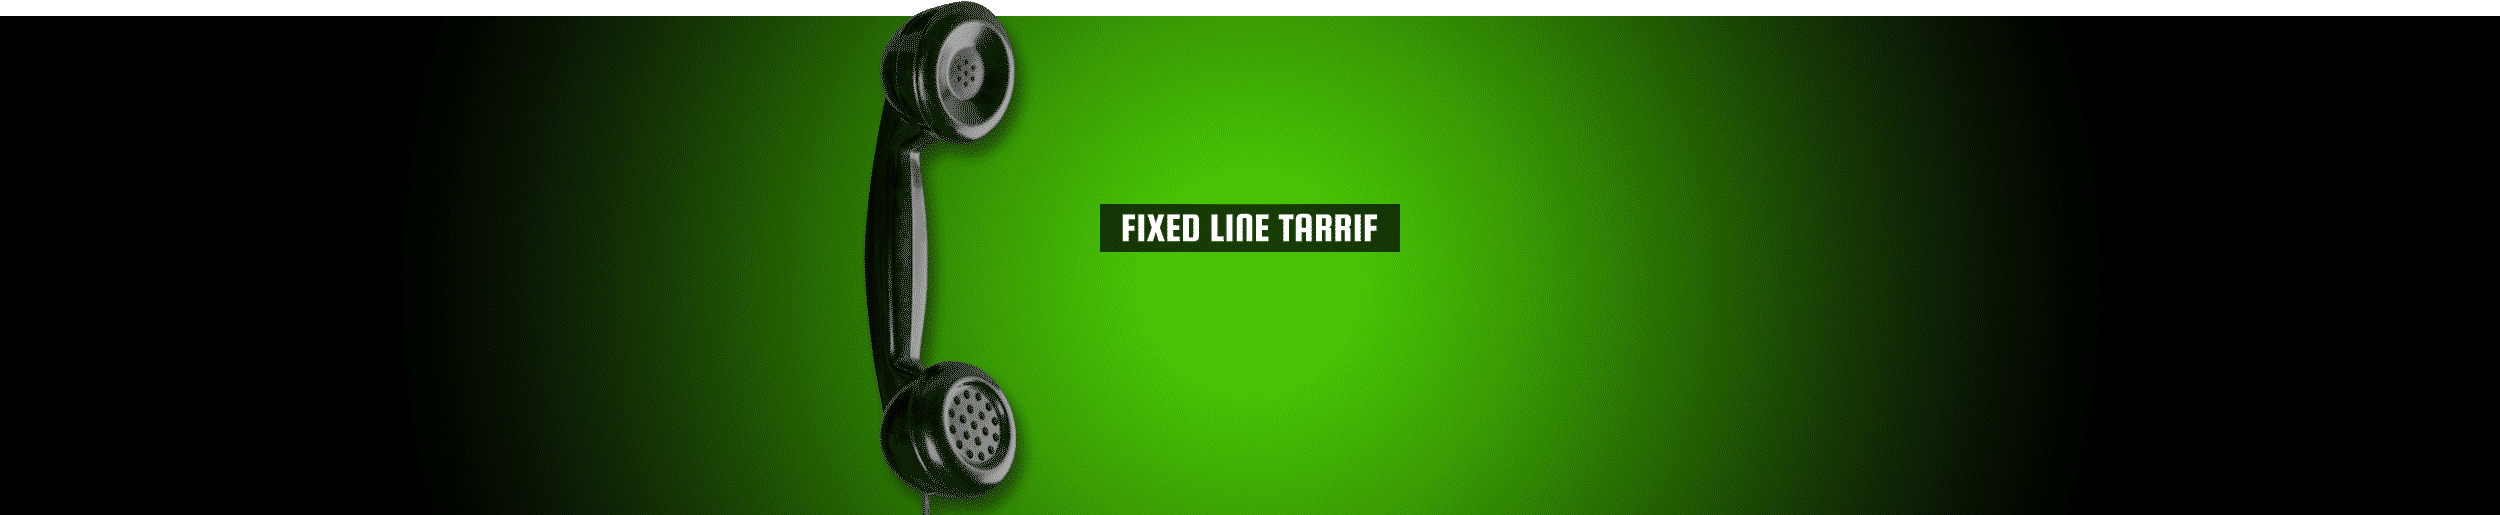 52Degrees fixed line tariffs - feature image | a black old-fashioned phone on a vivid green background | Telecoms Solutions, Norwich